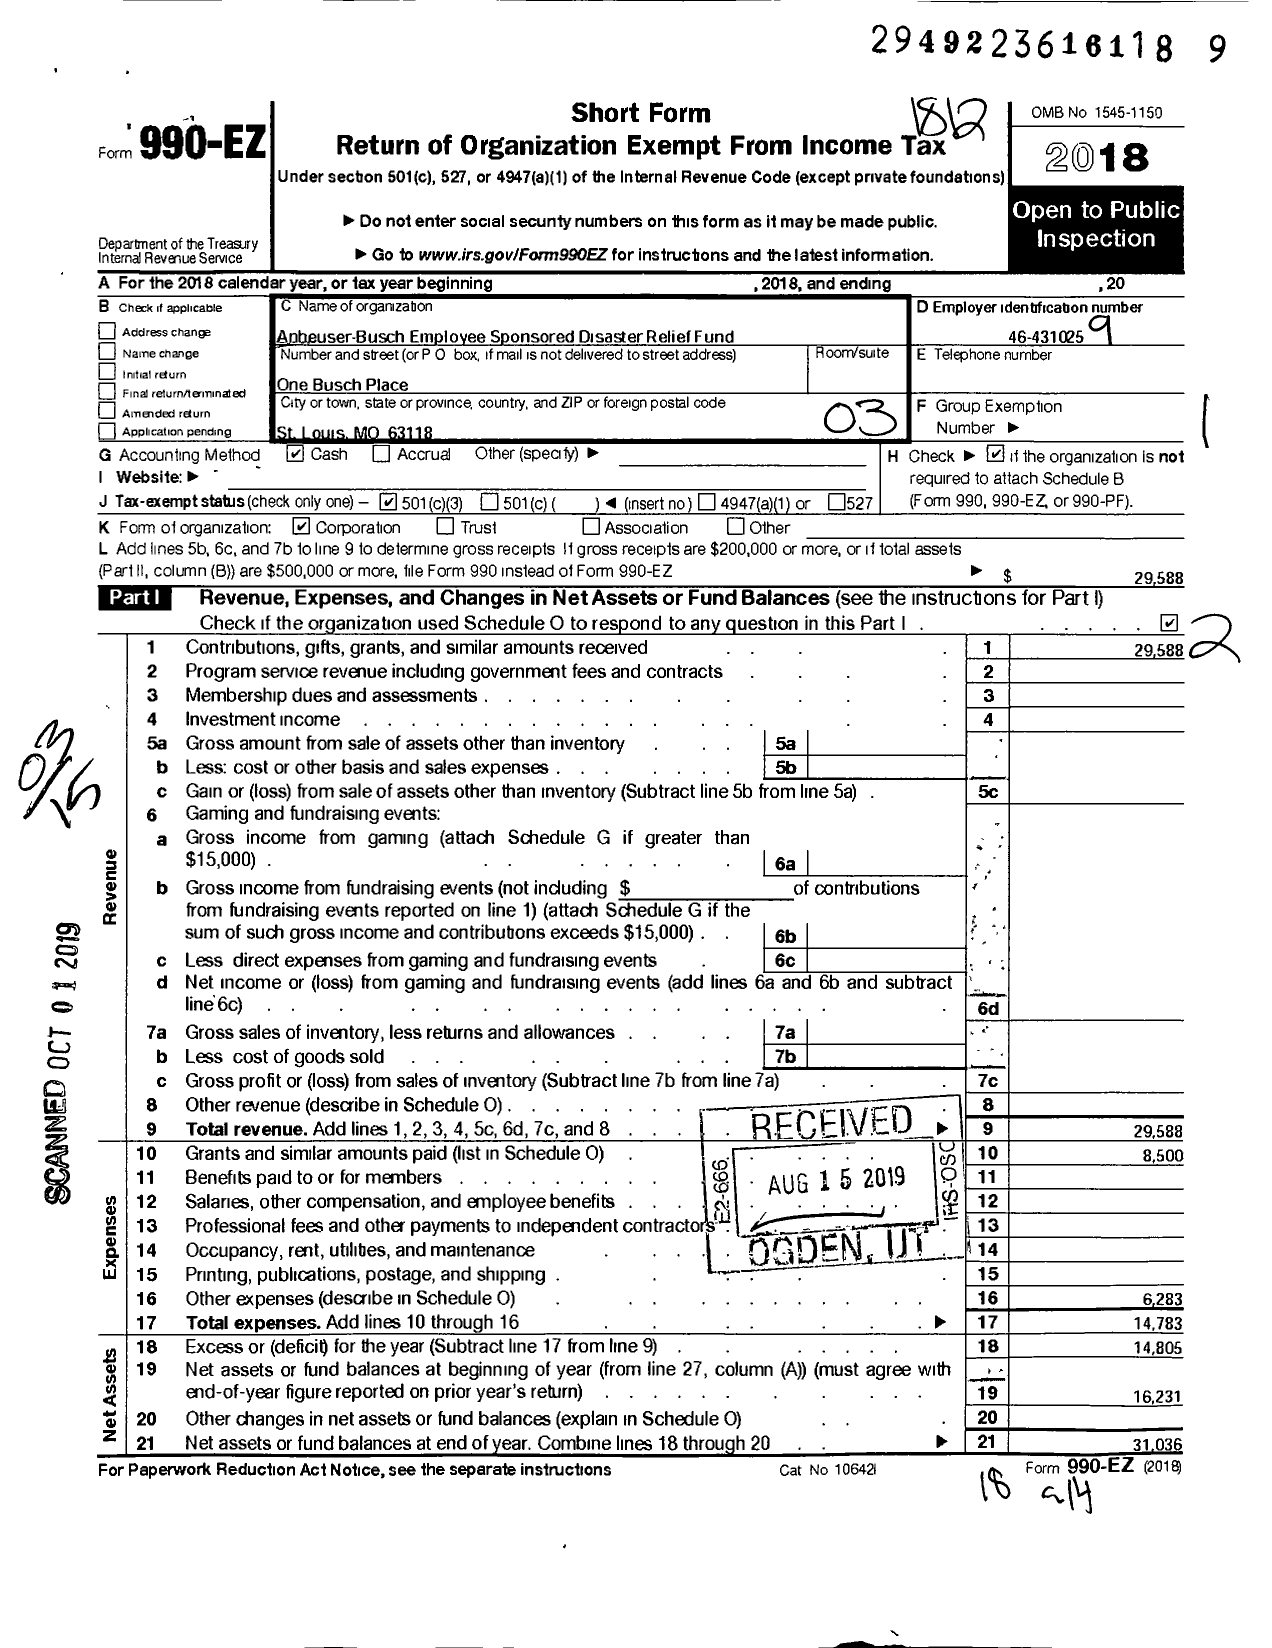 Image of first page of 2018 Form 990EZ for Anheuser-Busch Employee Sponsored Disaster Relief Fund